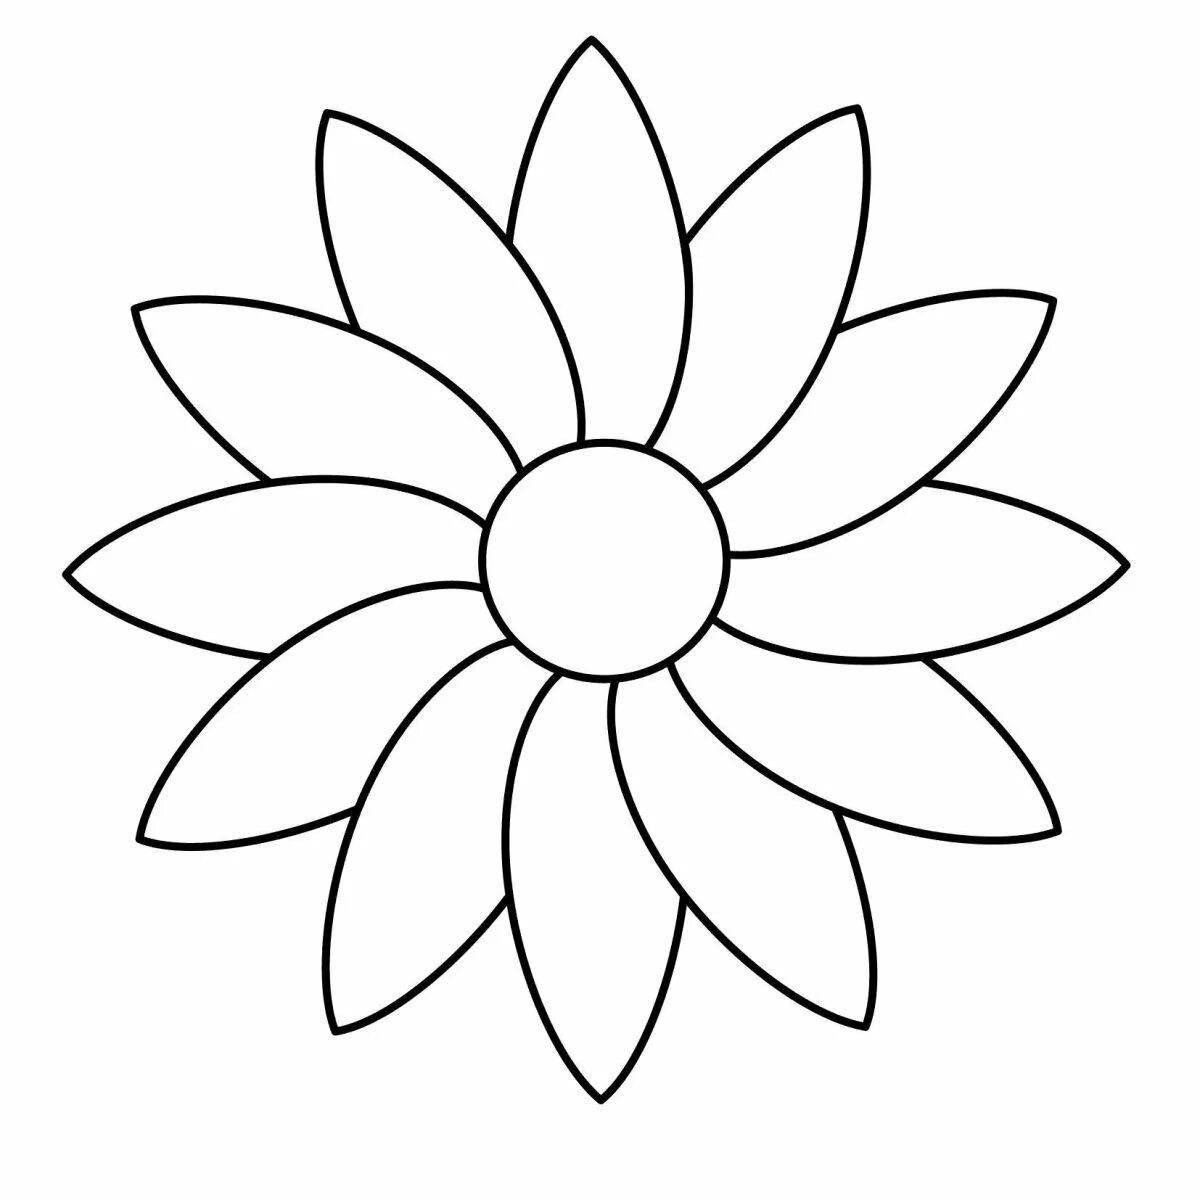 Exciting daisy coloring for kids